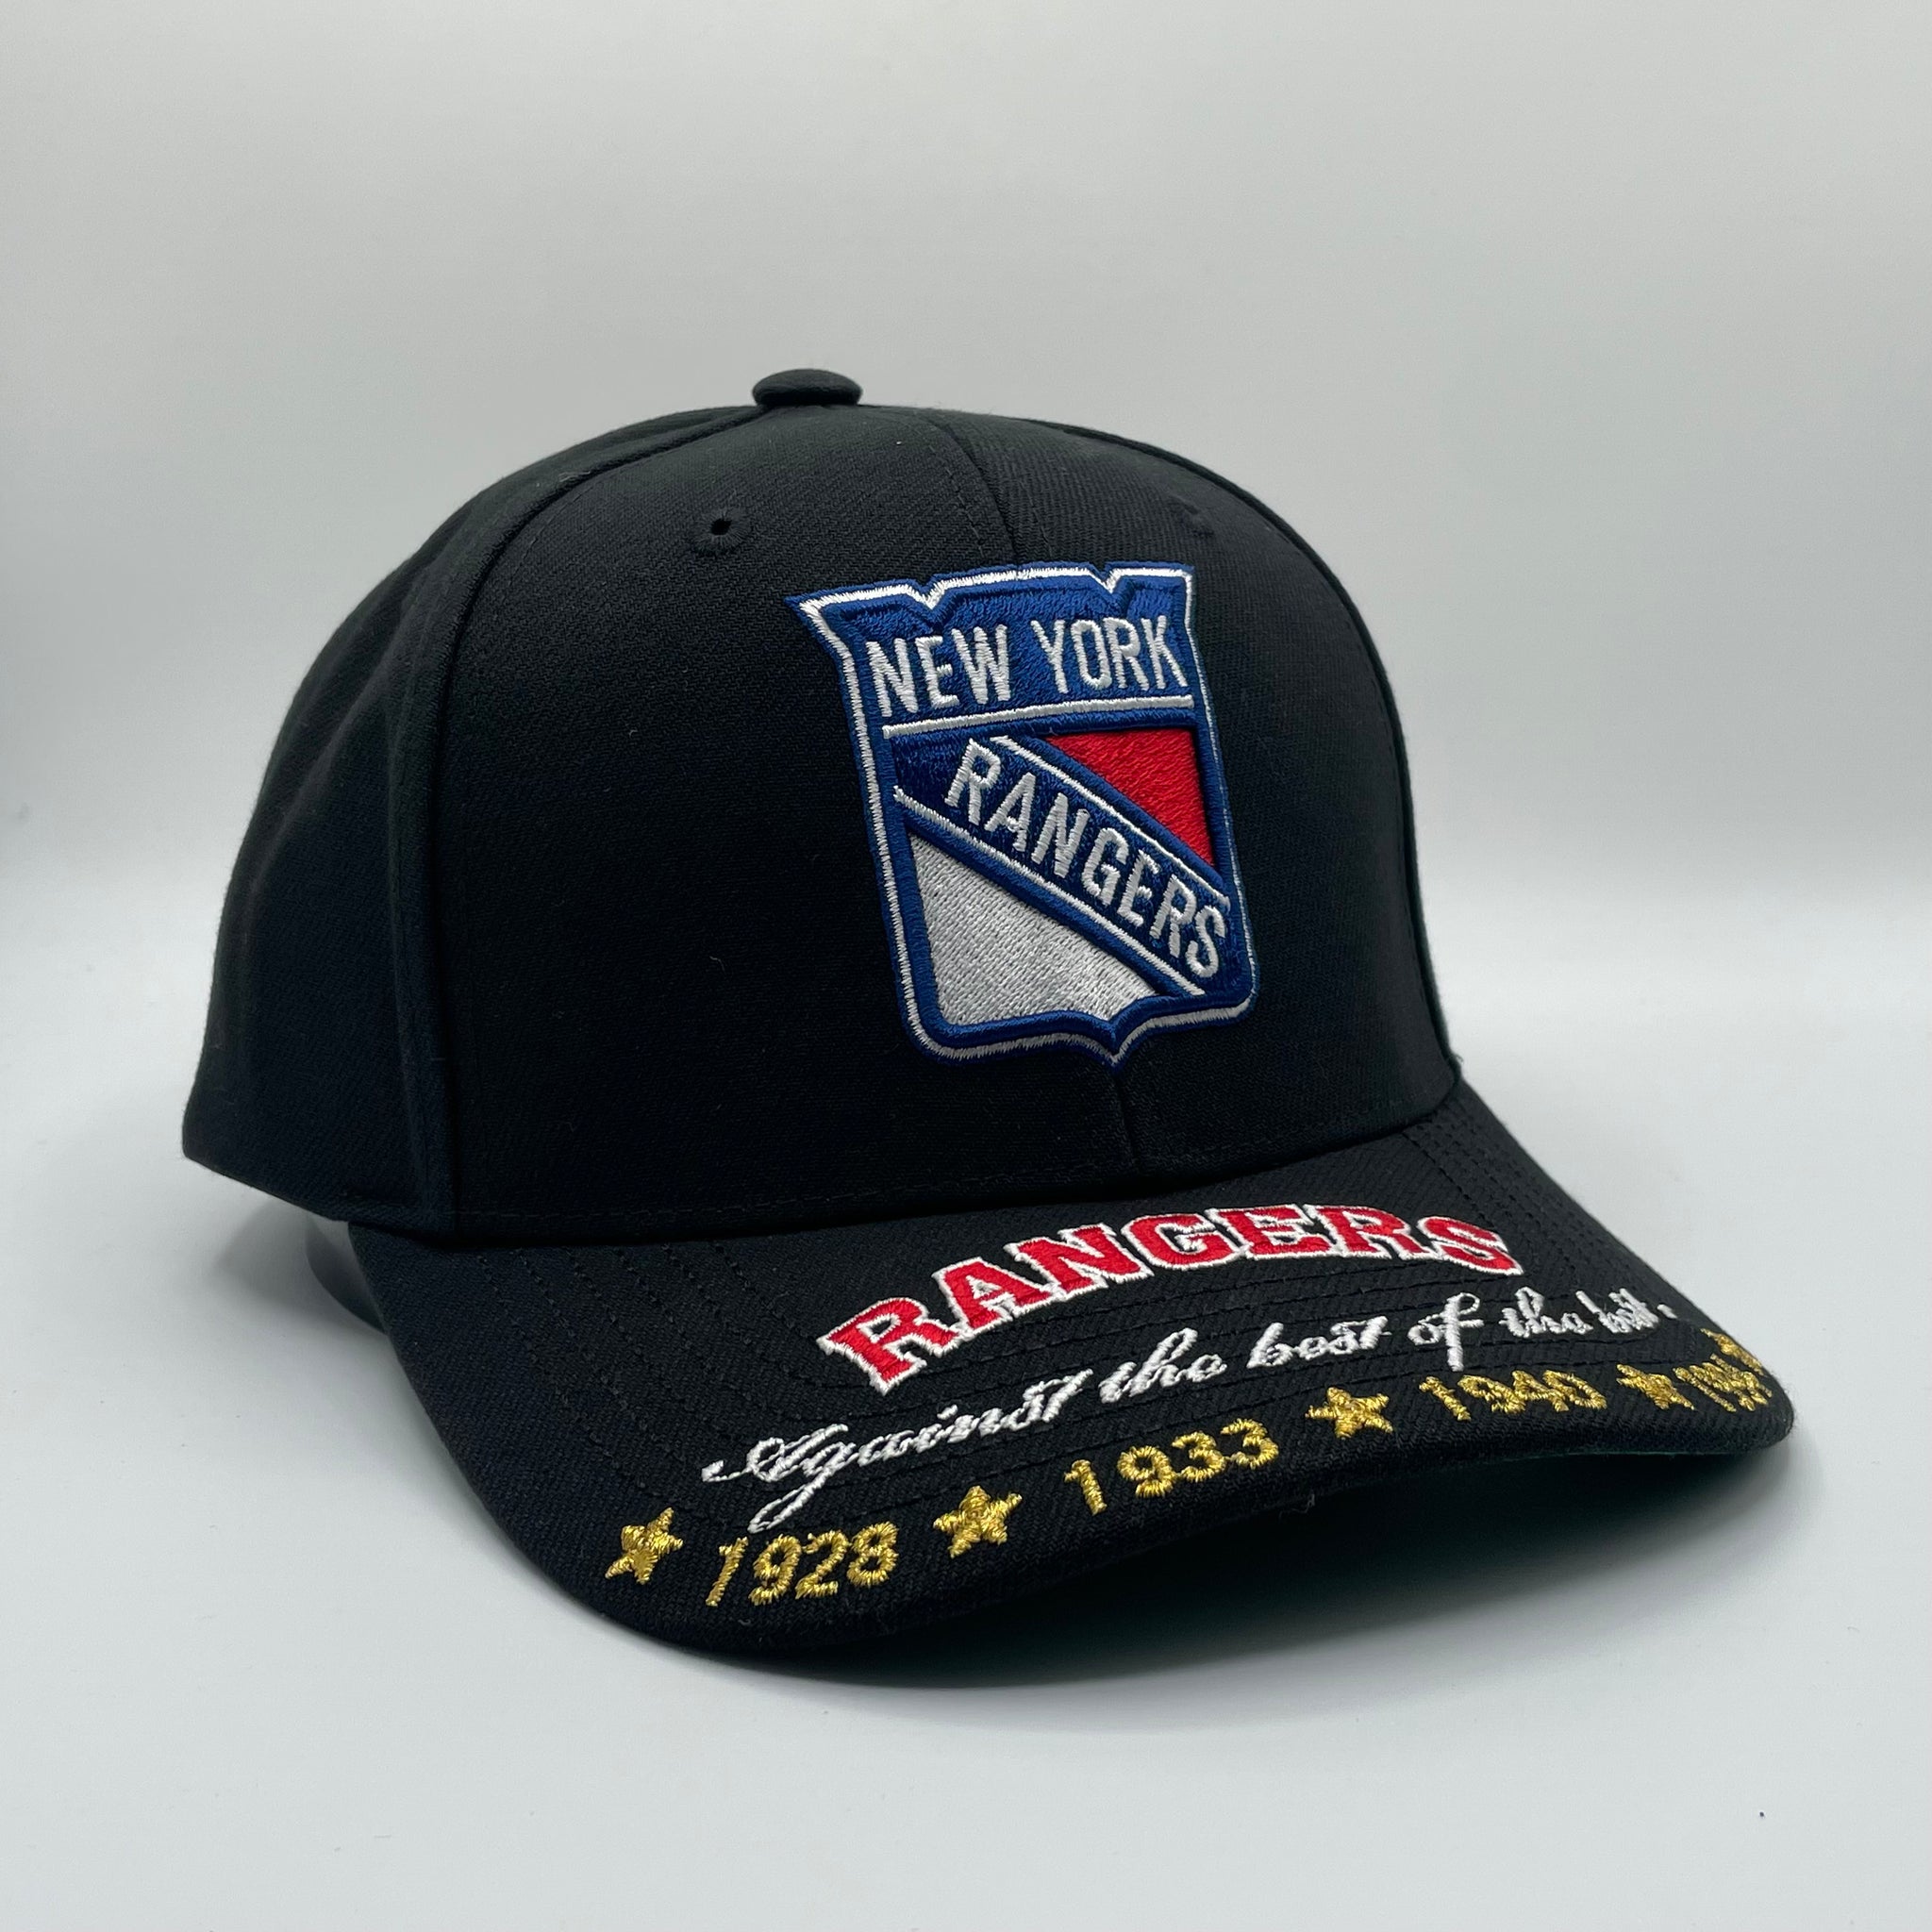 New York Rangers 'Against the Best of the Best' Snapback Hat